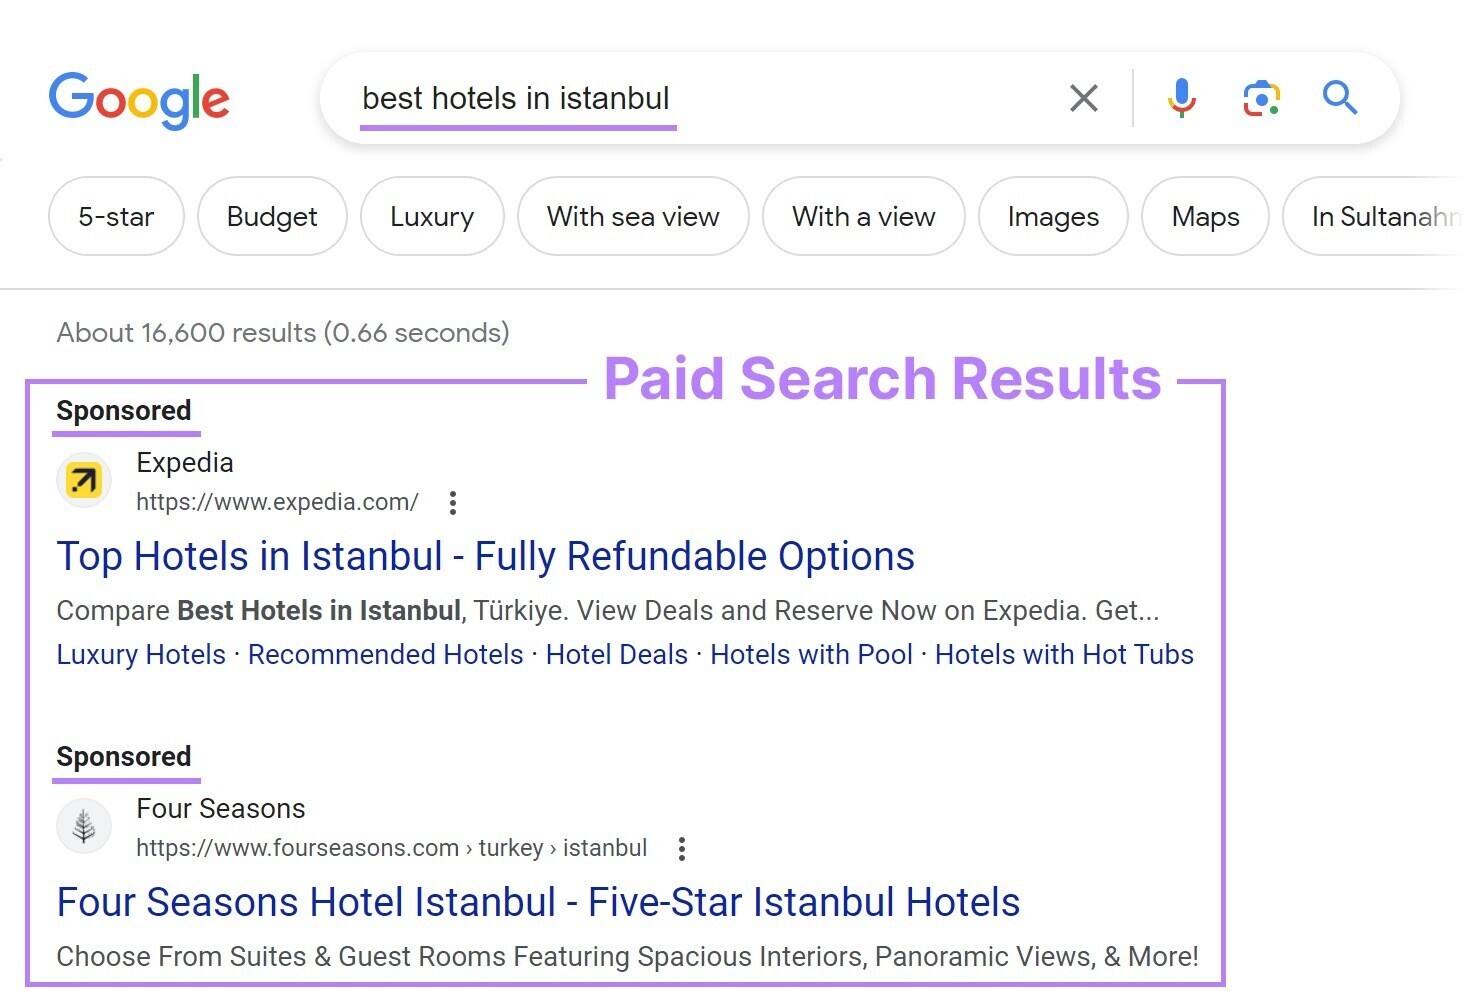 an example of paid search results for "best hotels in istanbul" query